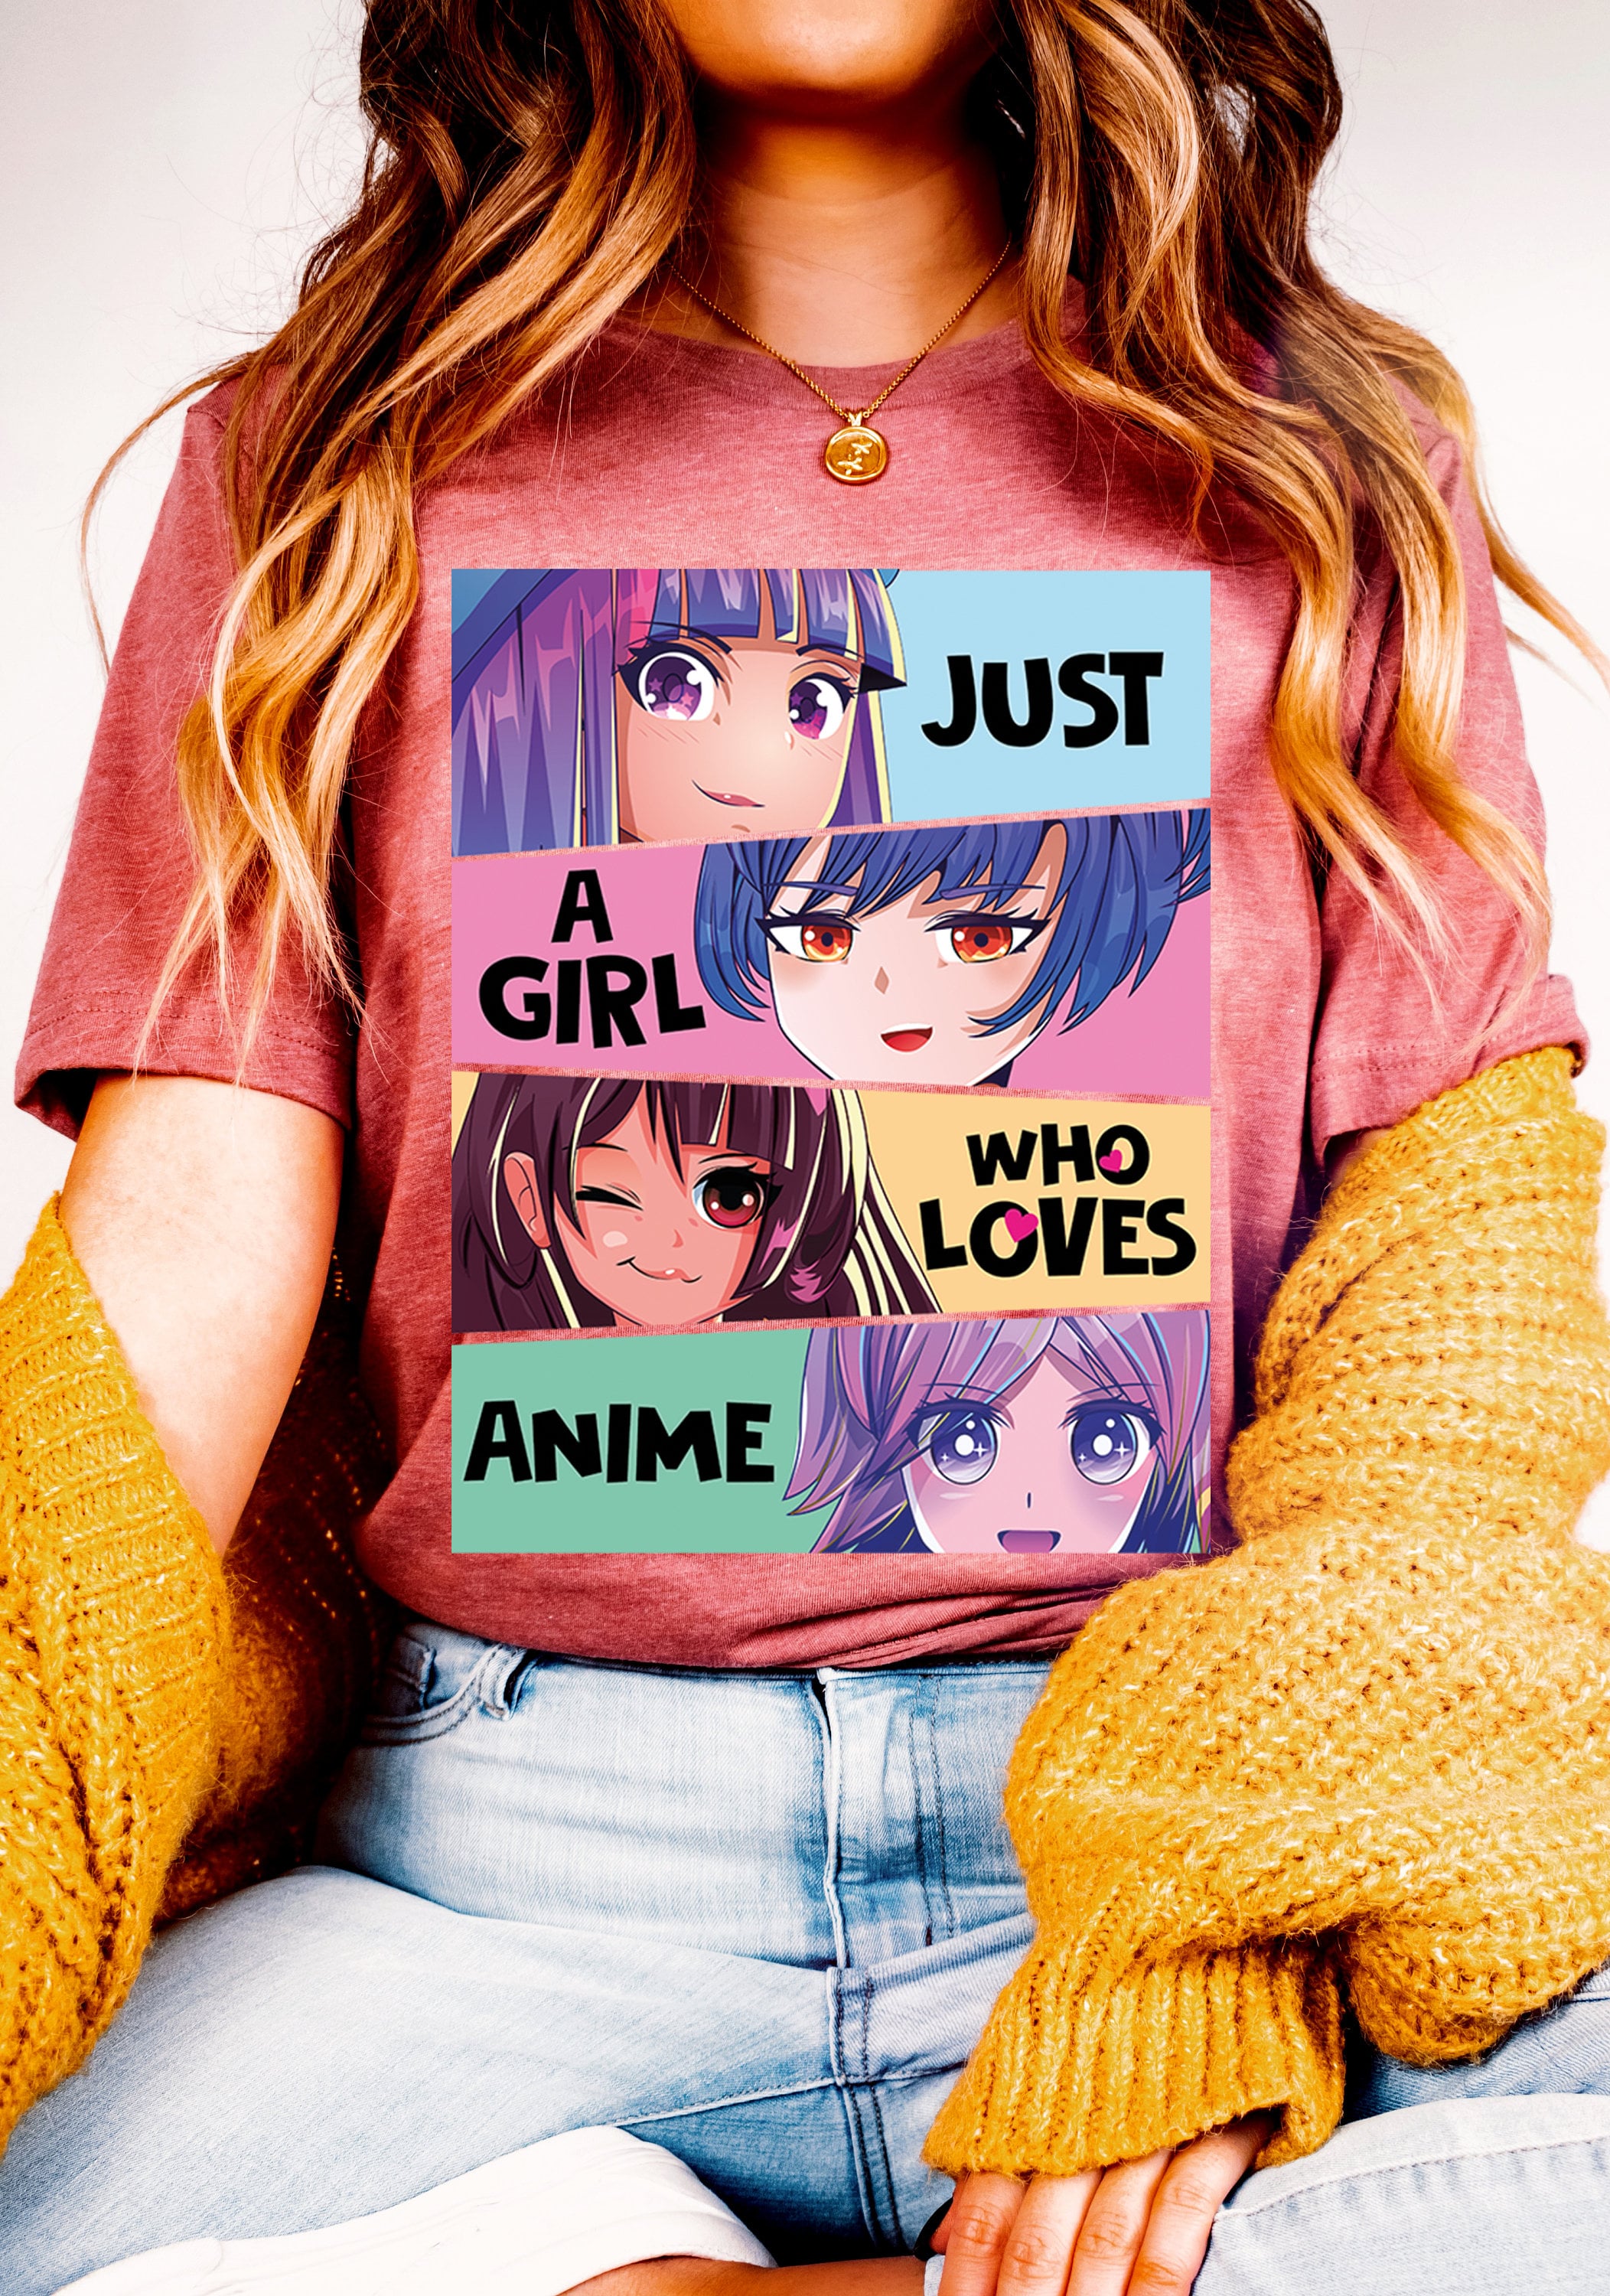 Just A Girl Who loves Anime shirt, Anime Lover Tshirt, Gift For Anime Lover, Cool Anime T-shirt, Anime Clothing, Anime Tshirt 1190105134